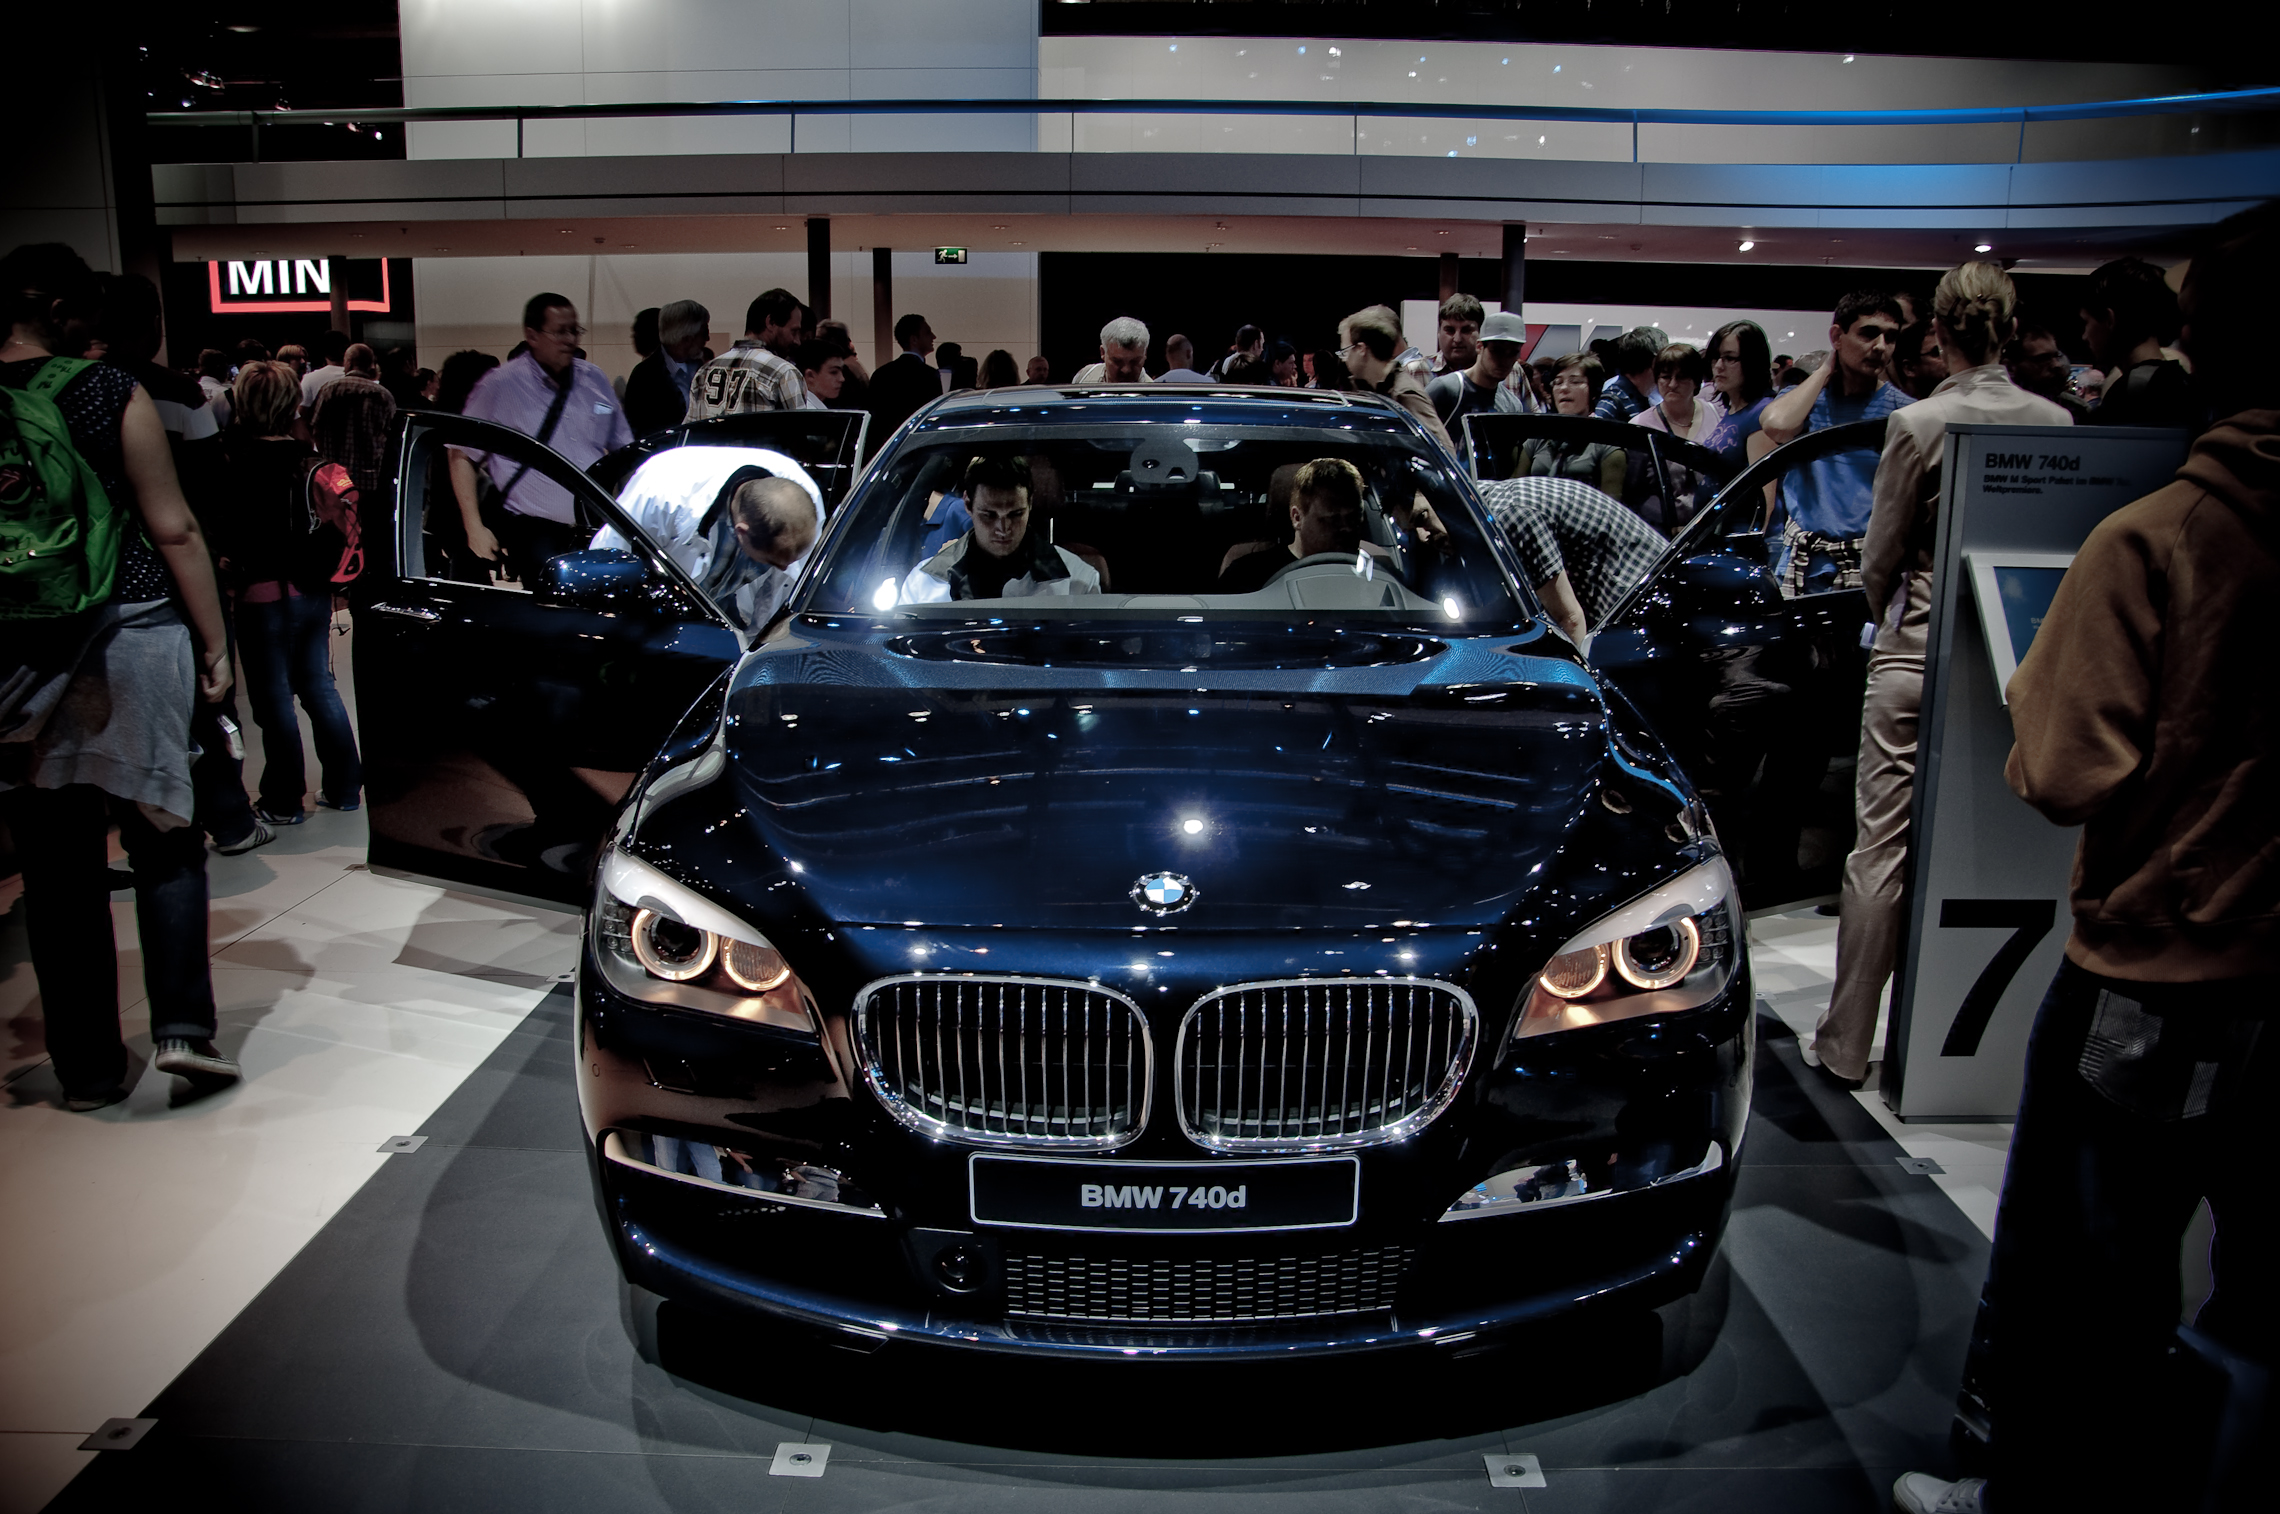 IAA 2009 - BMW 740d with M Body Kit | Flickr - Photo Sharing!